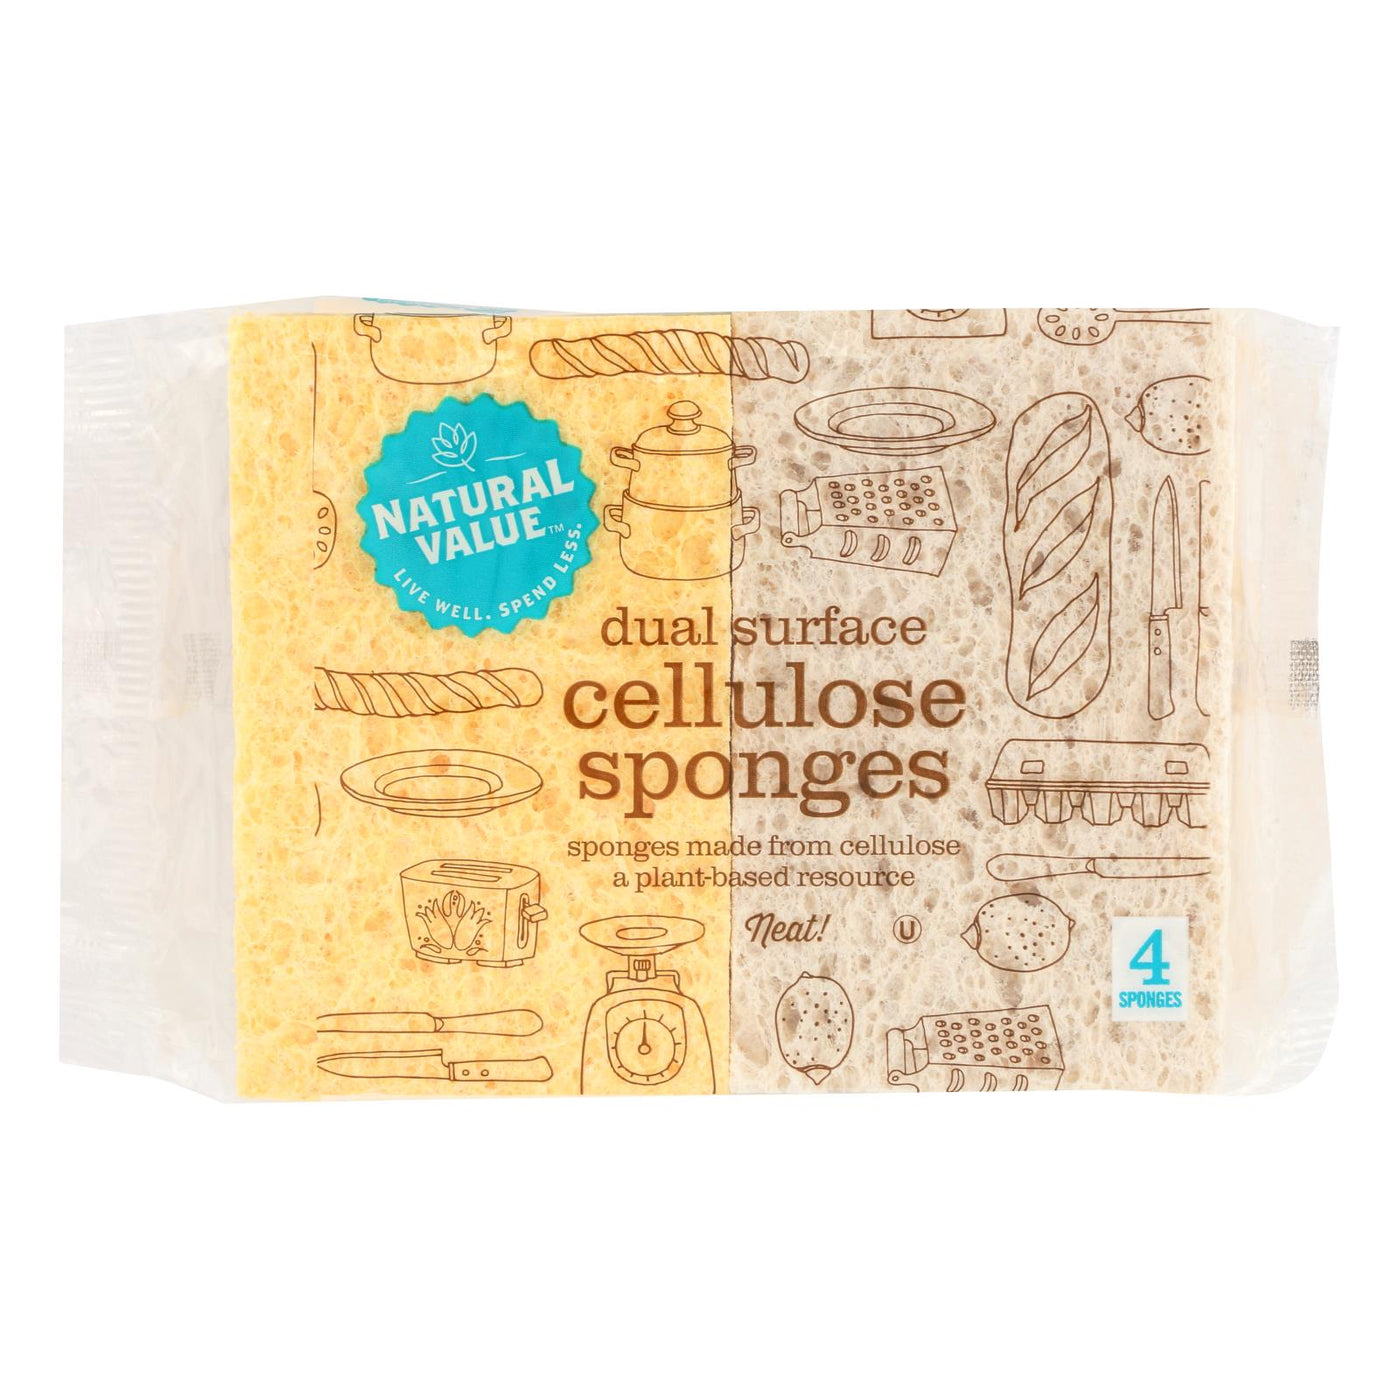 Natural Value Dual Surface Cellulose Sponges - Case Of 24 - 4 Count | OnlyNaturals.us